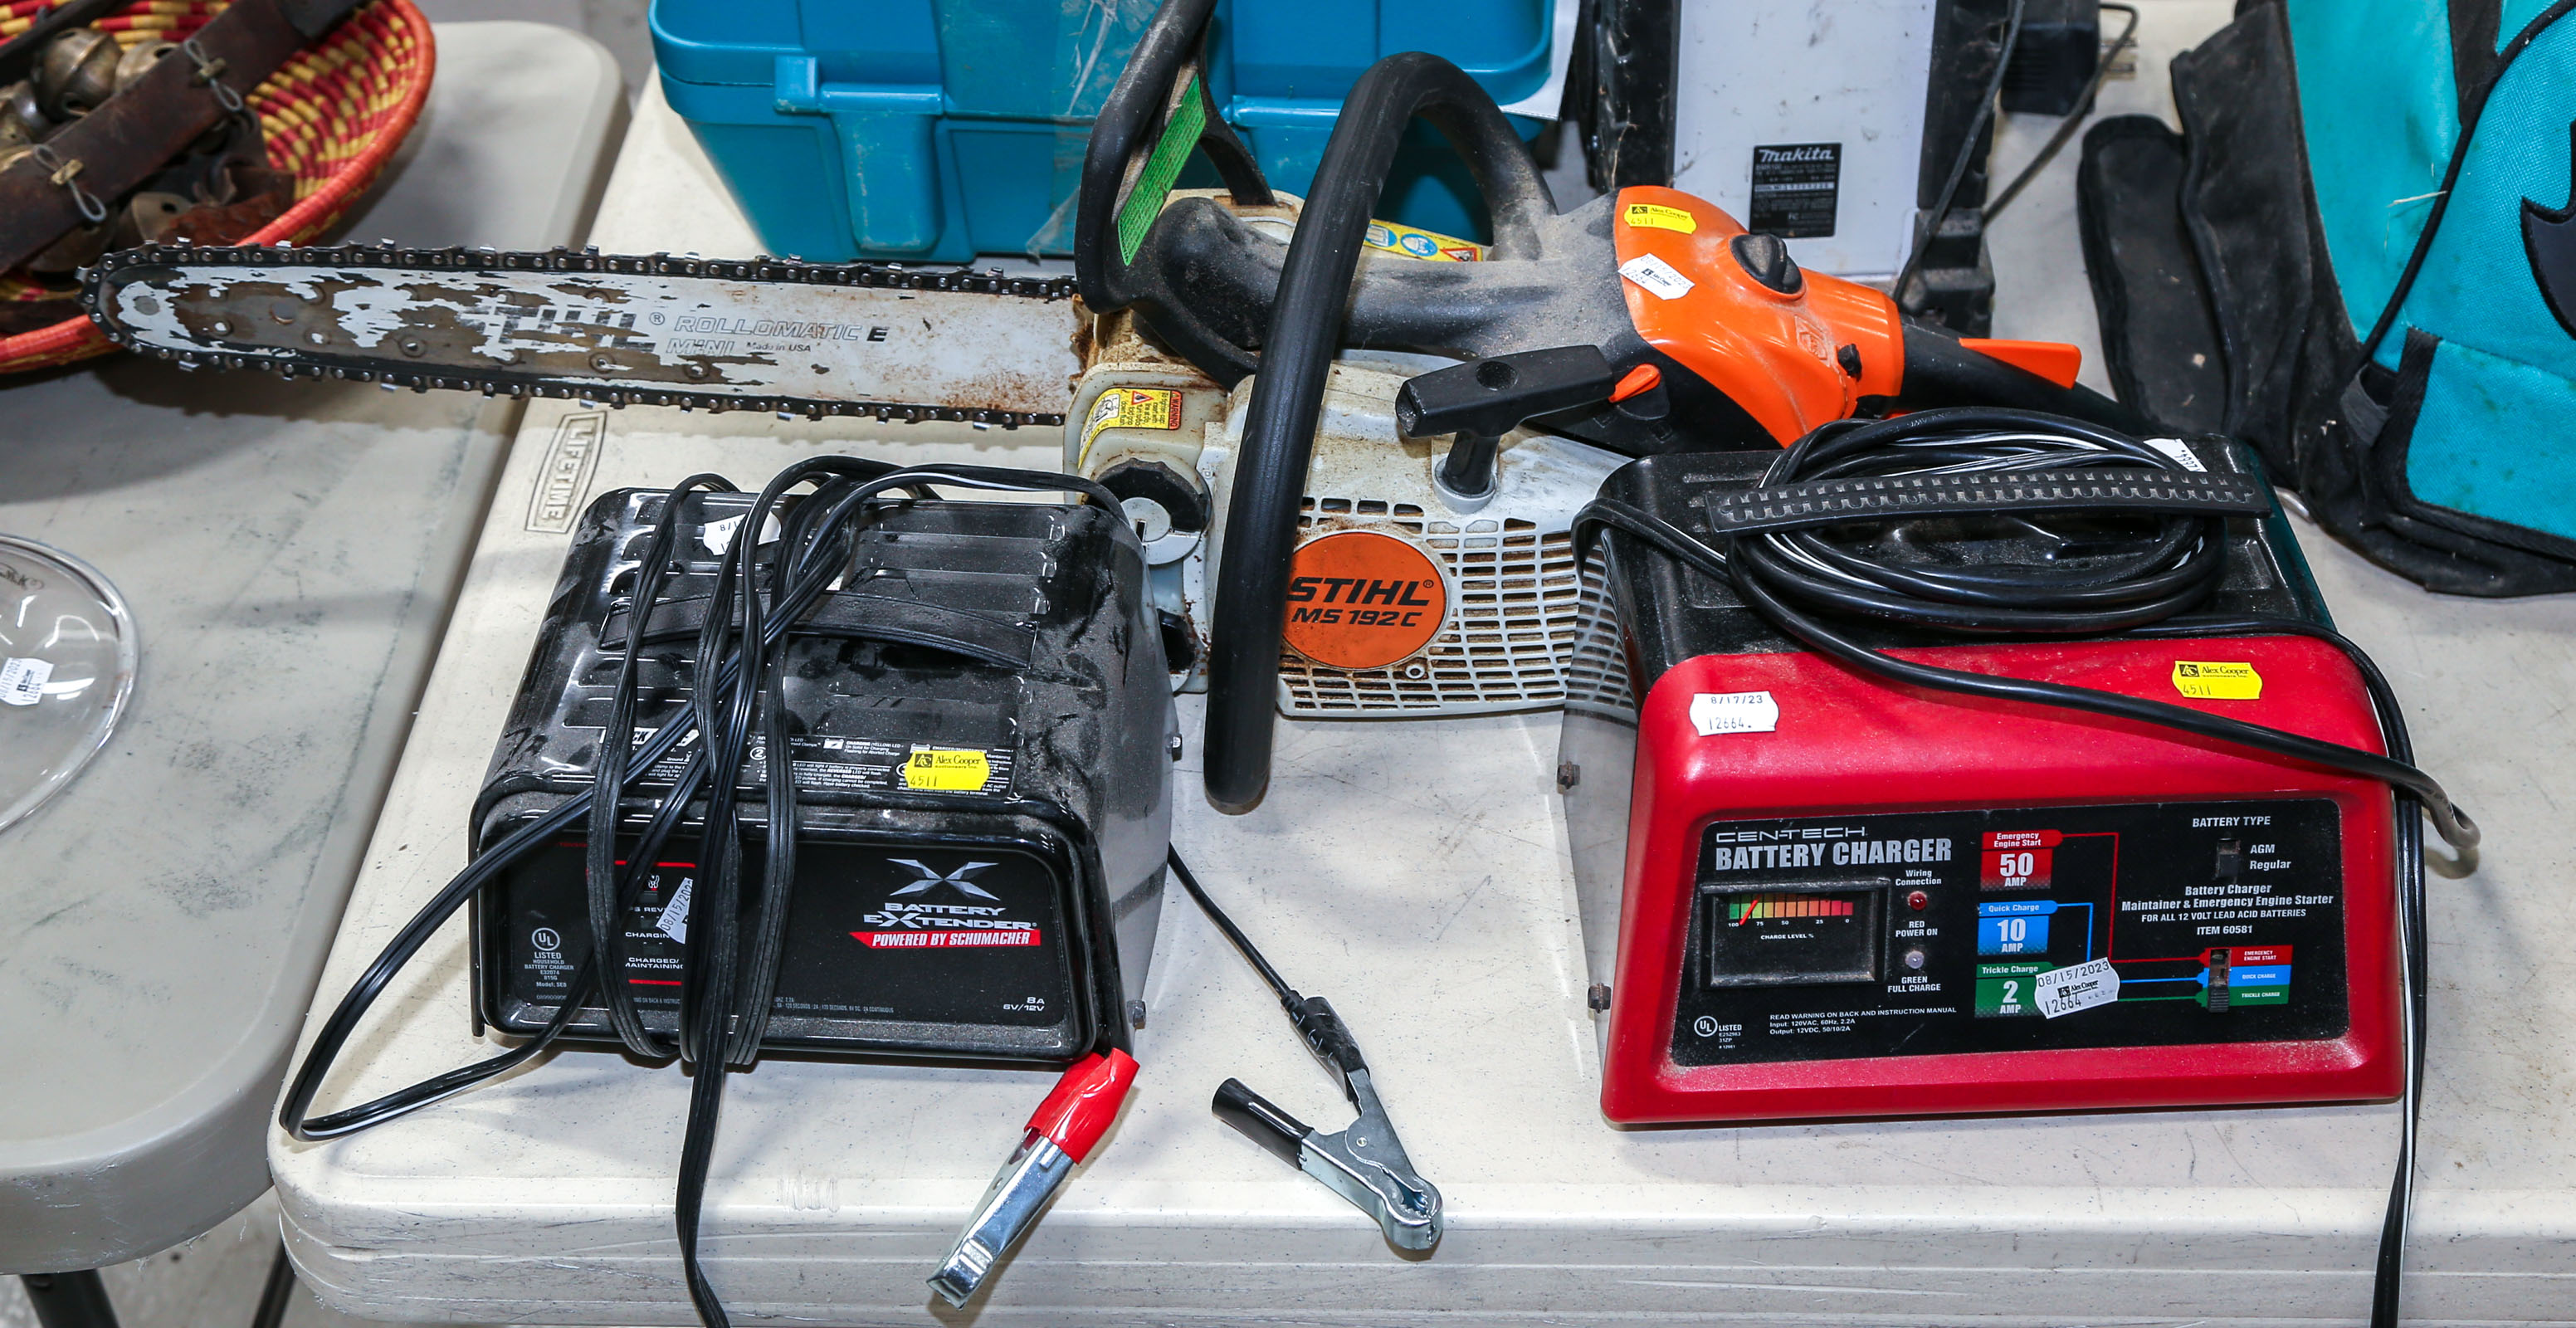 TWO BATTERY CHARGERS With a Stihl